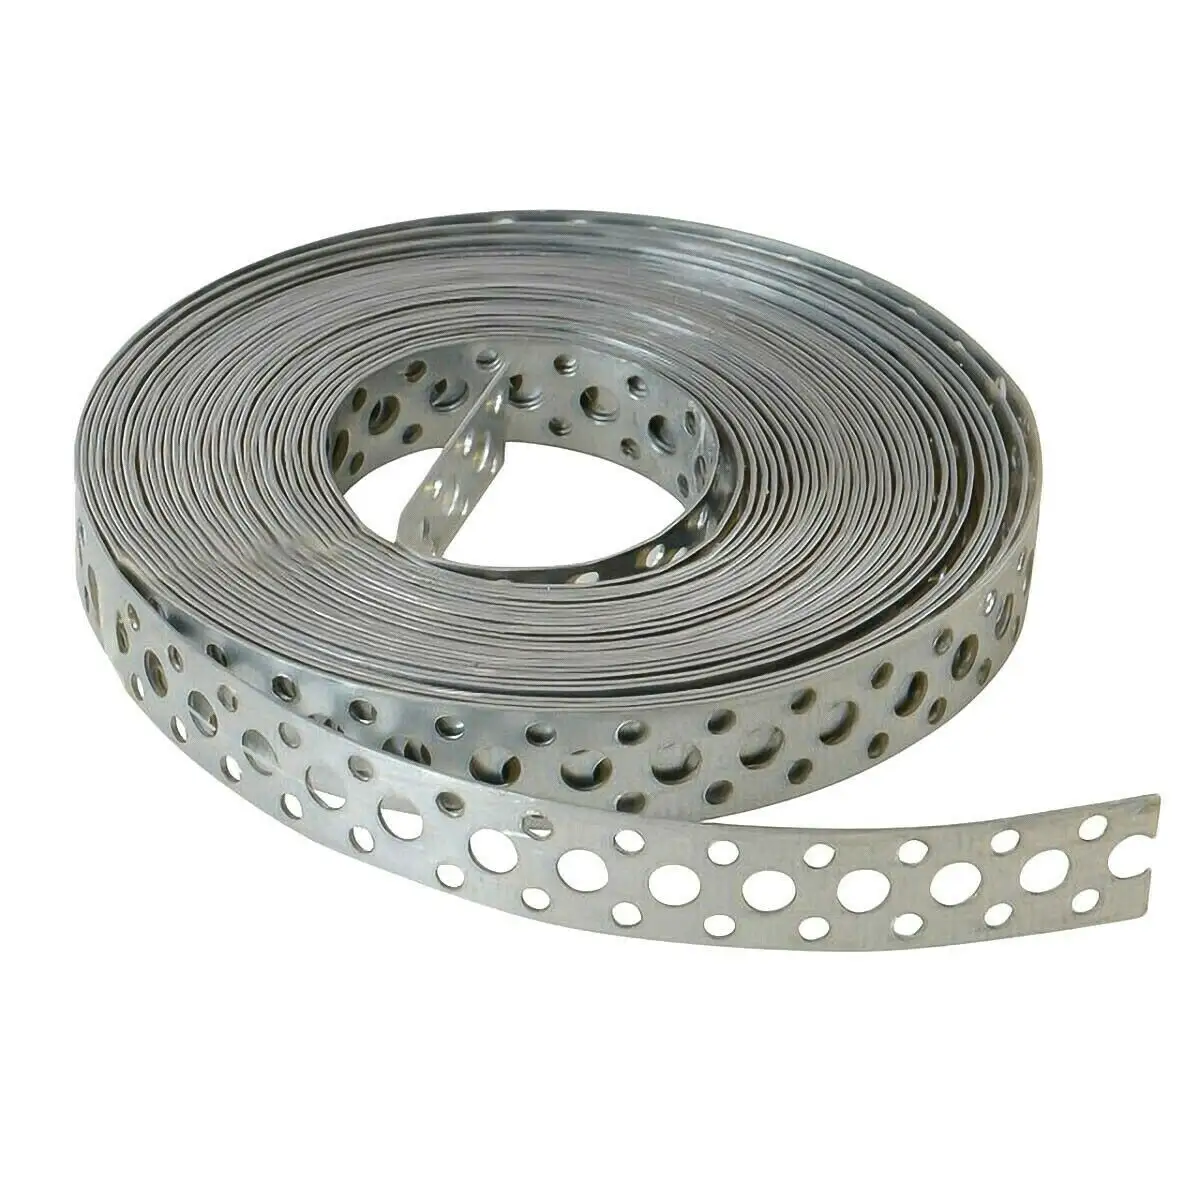 Metal Straight five holes Perforated Banding galvanized steel strips five Holes Perforated band for fixing strip wholesale price